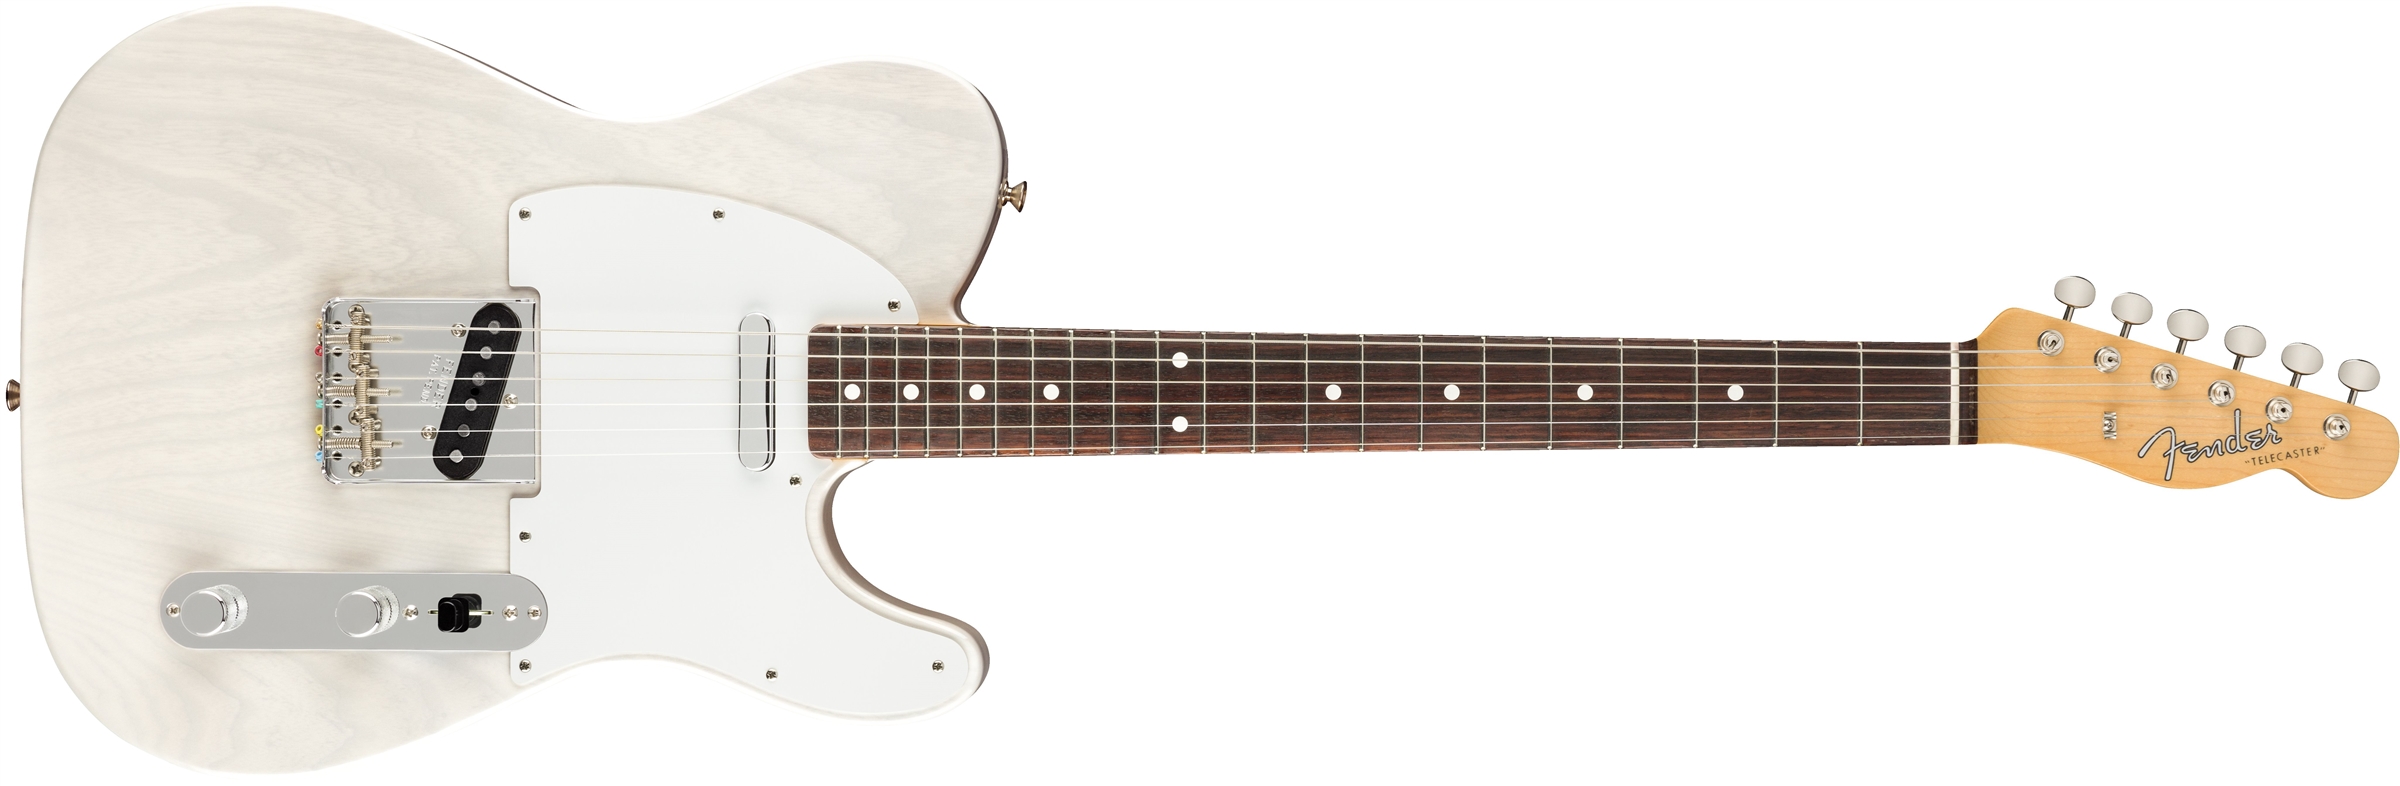 Gear Review: Check Out This Demo Of Fender’s Jimmy Page Mirror Telecaster